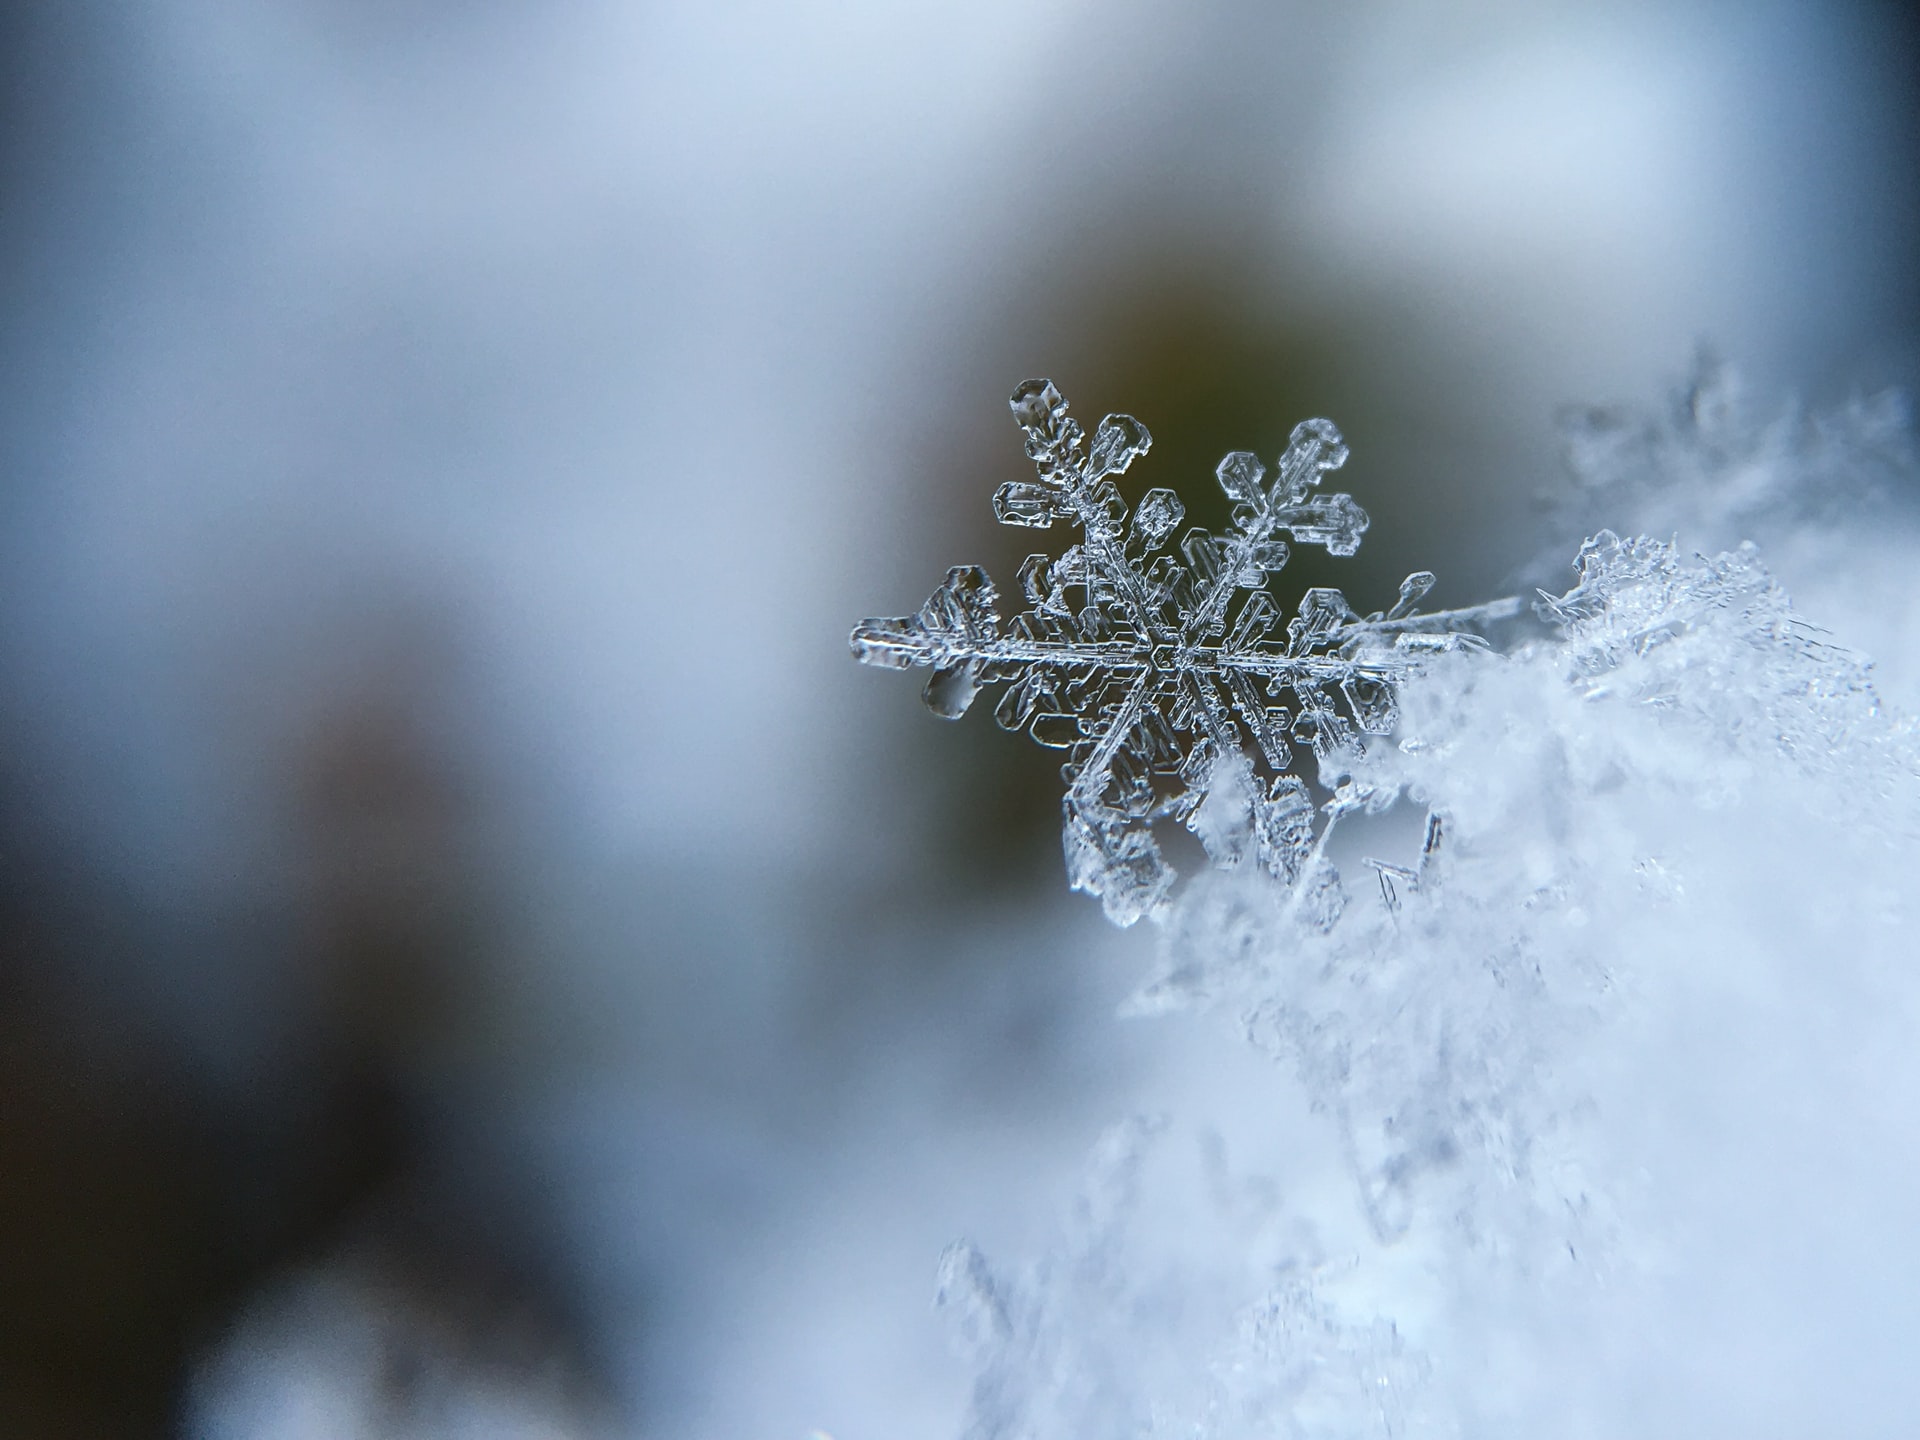 A single snowflake in front of a white blurry background.